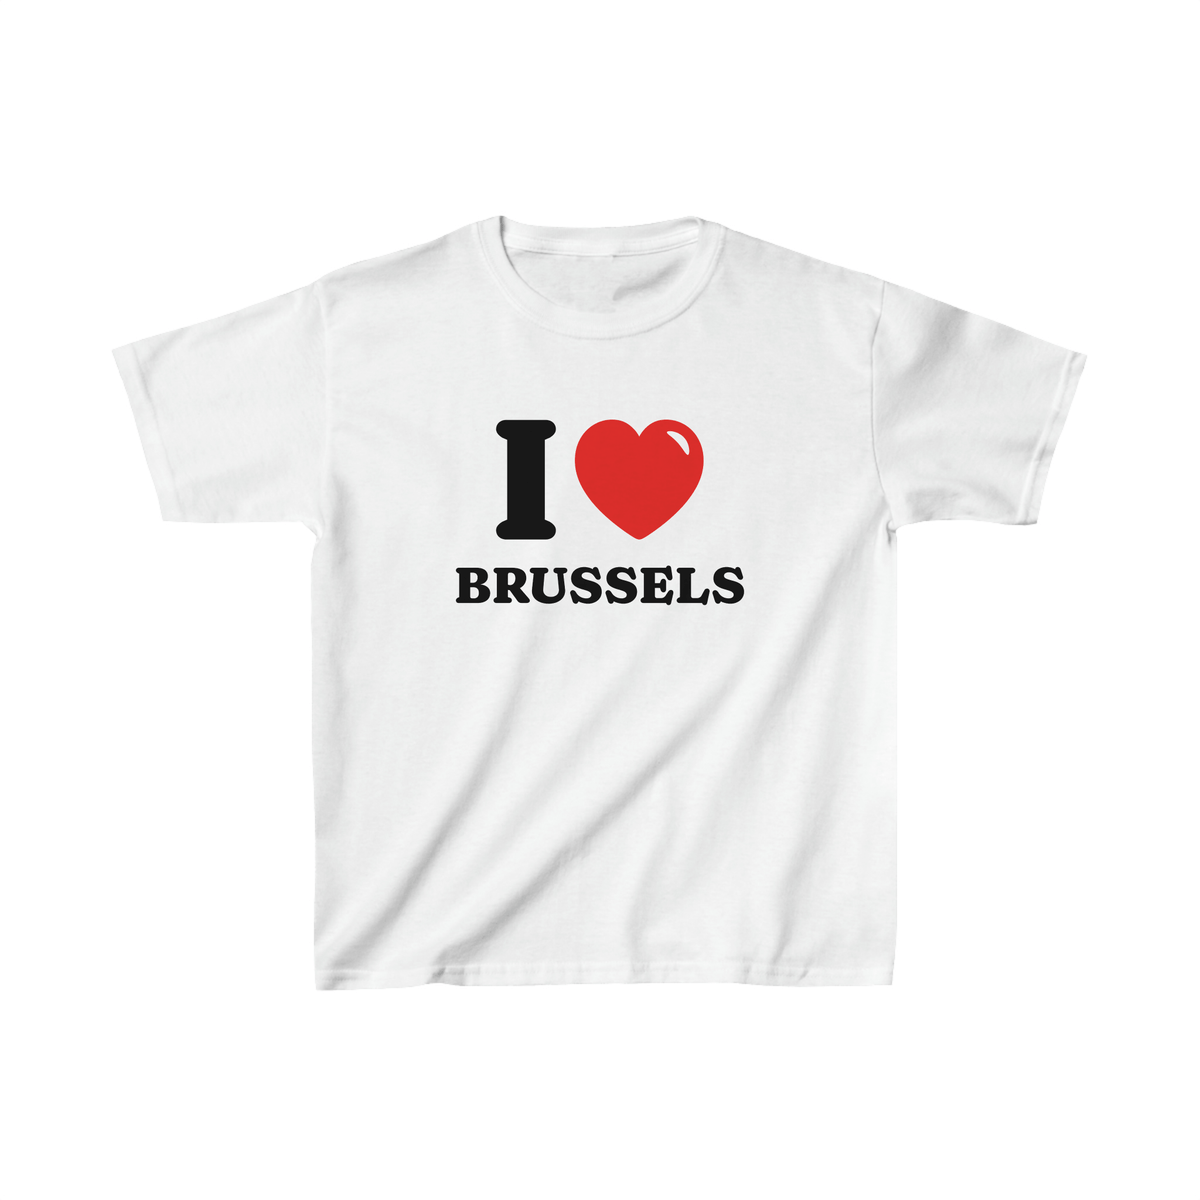 'I love Brussels' baby tee